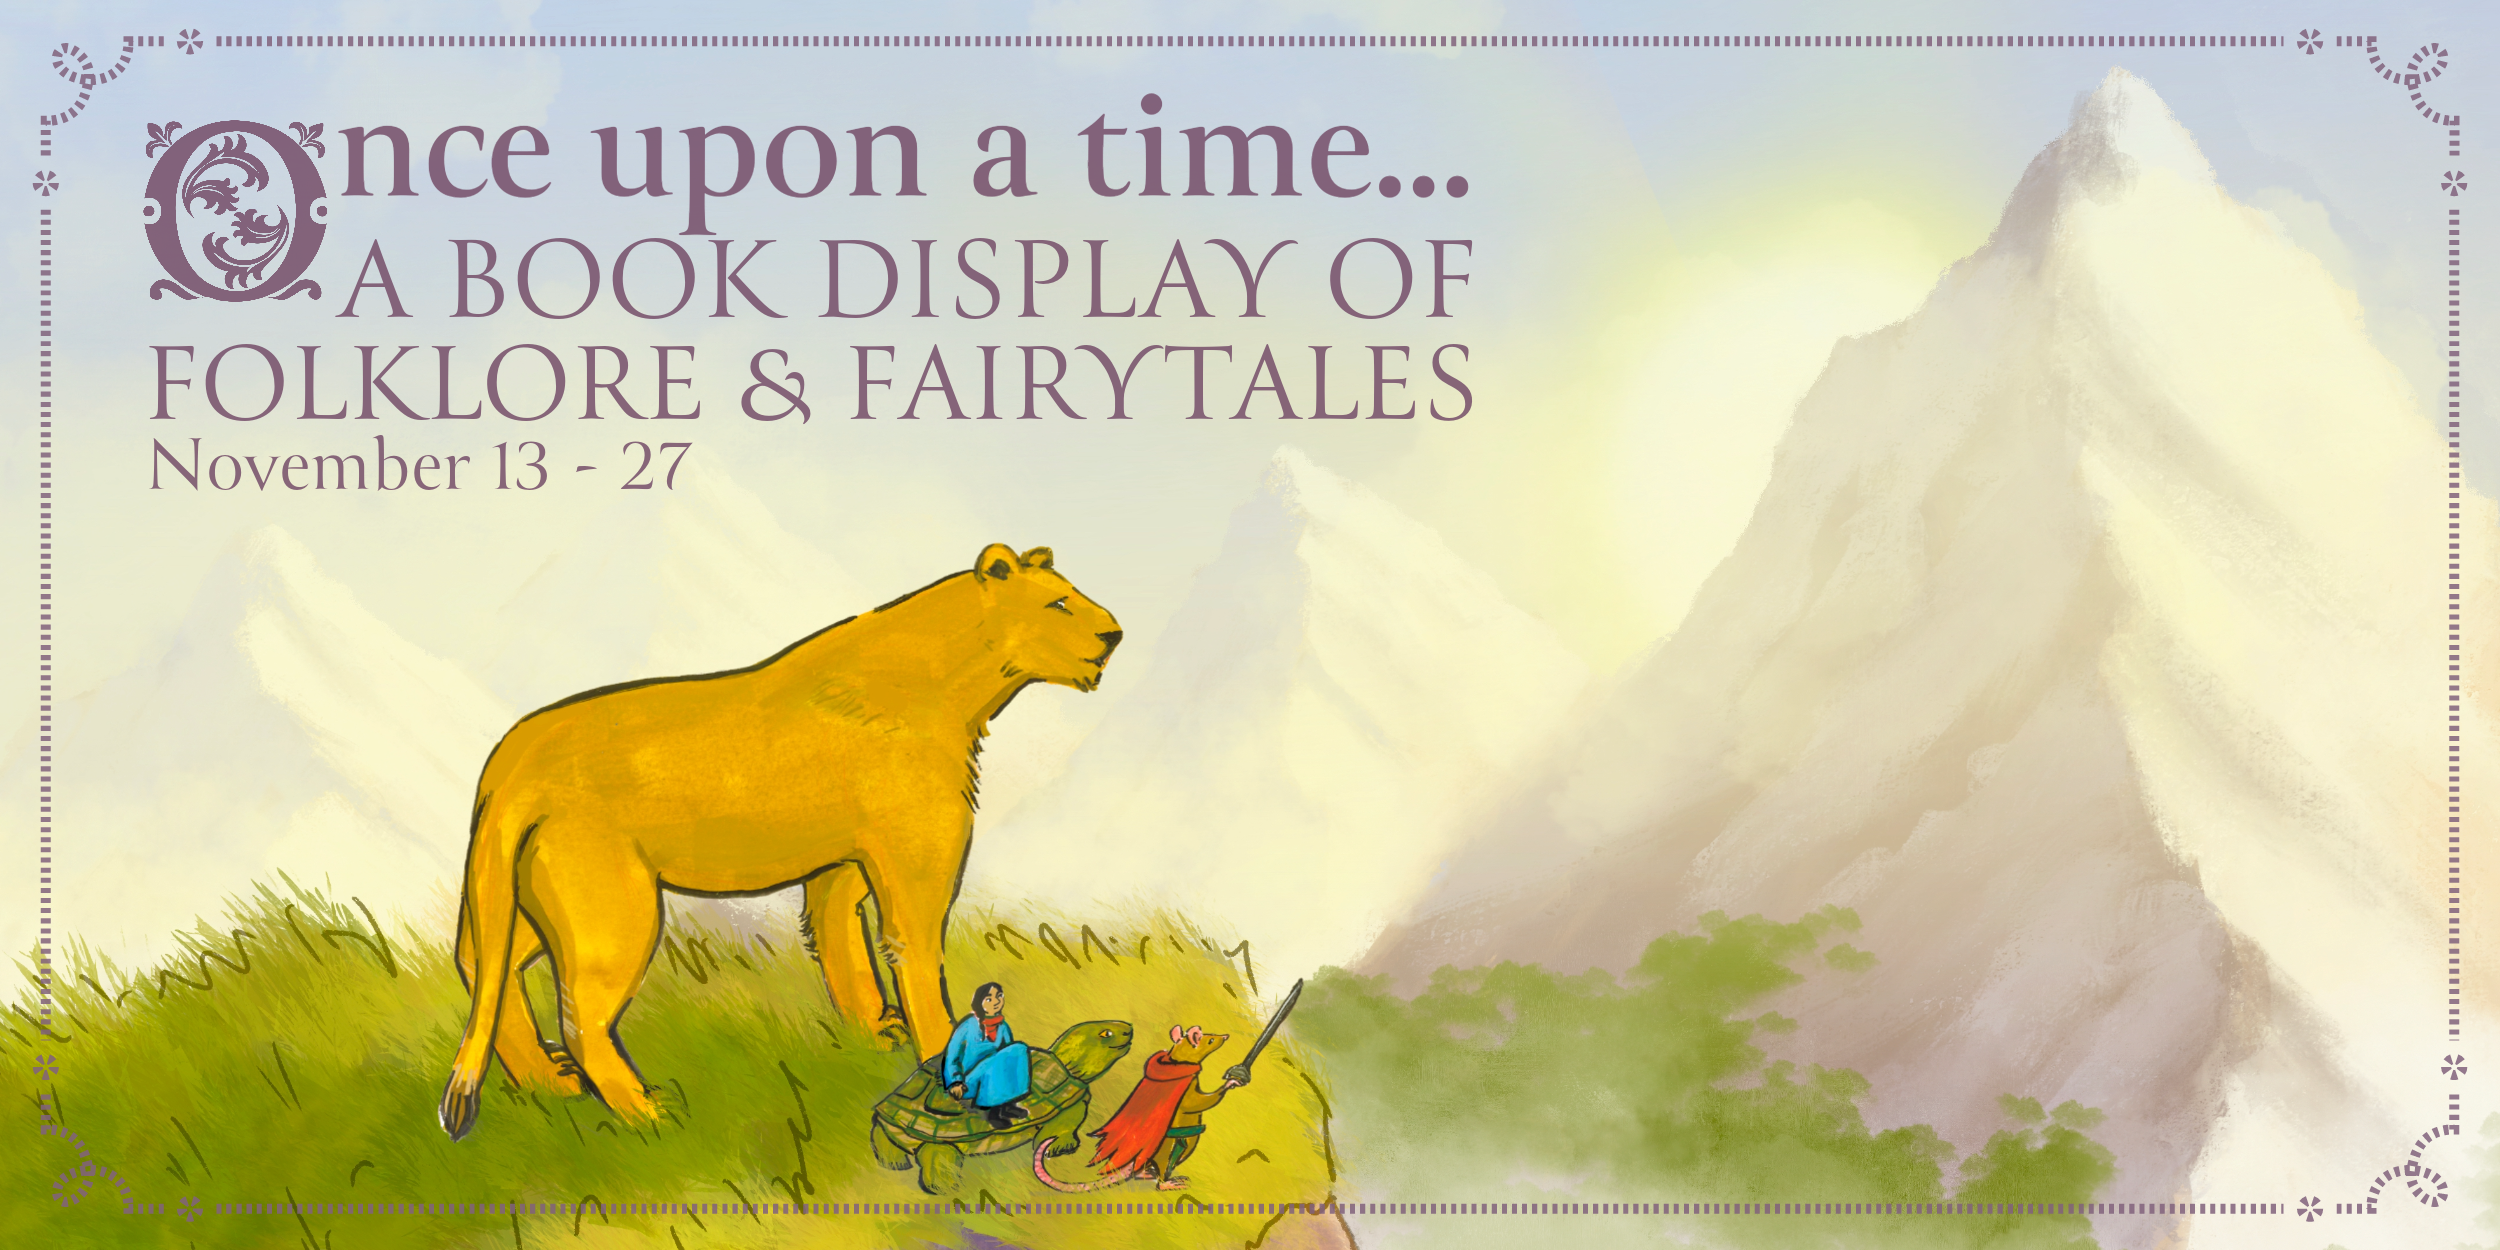 once upon a time book display poster